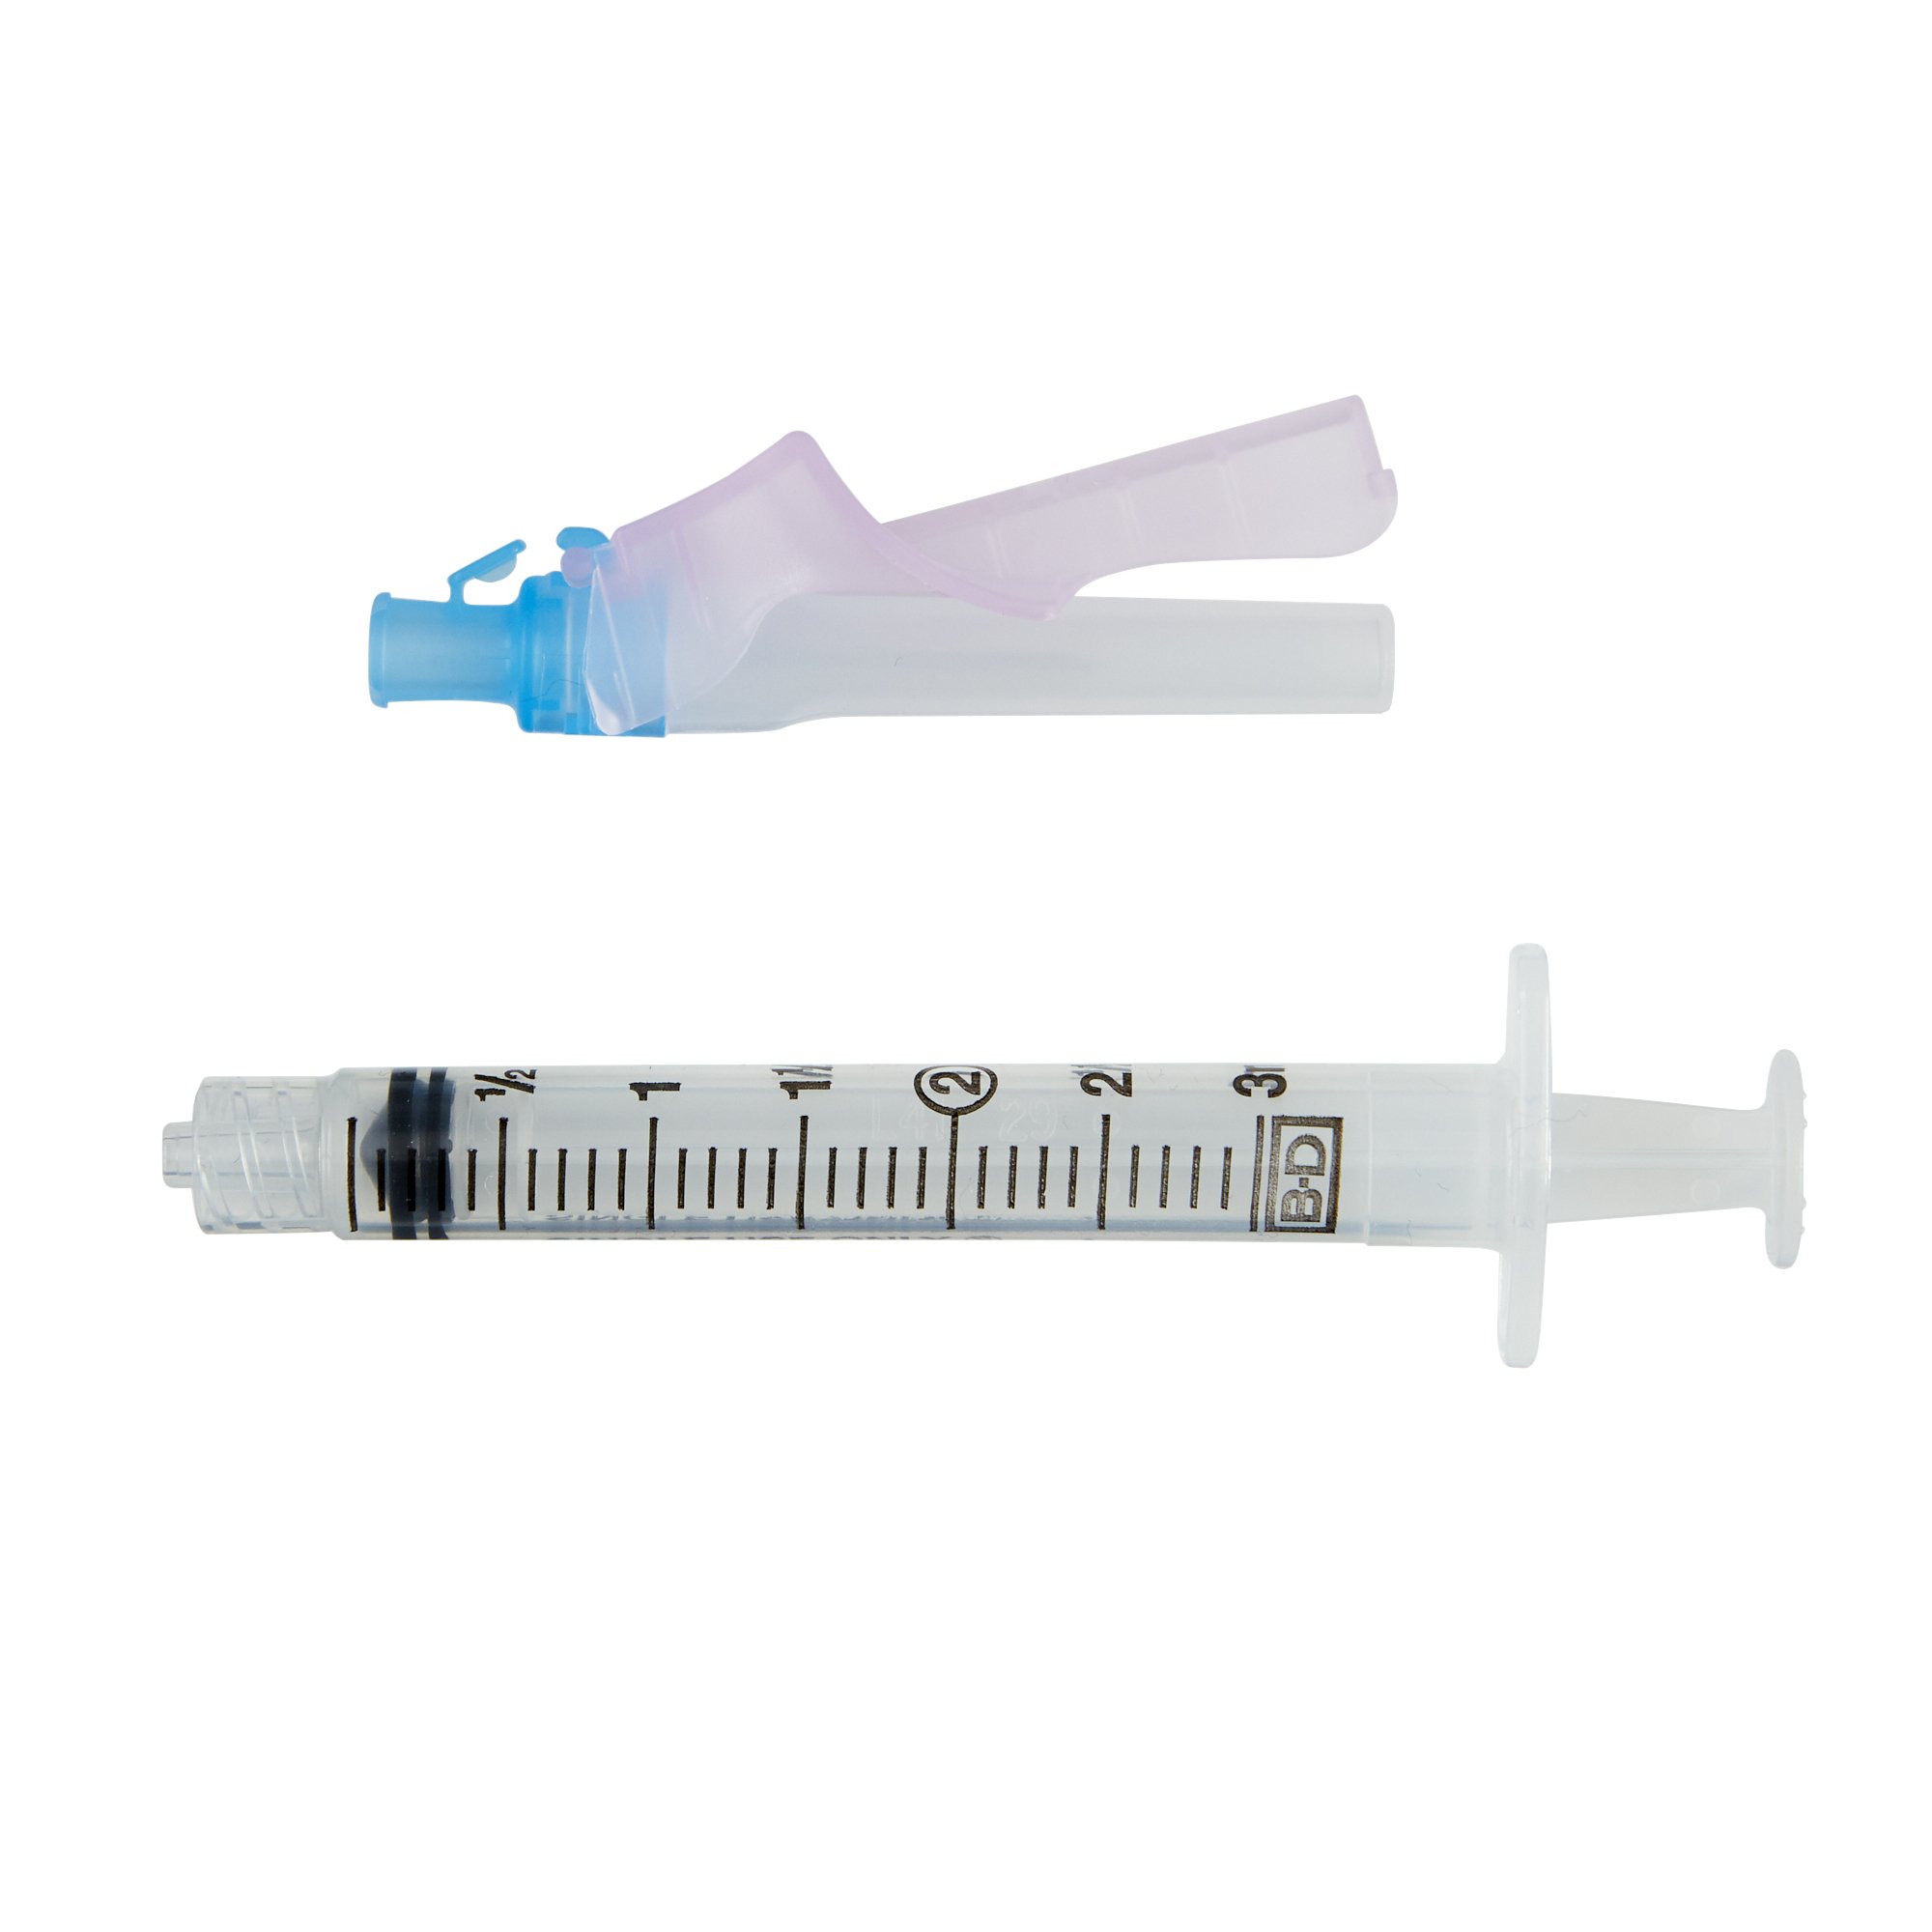 BD 305782 Eclipse needle 23 G x 1 in. with detachable 3 mL BD Luer-Lok Syringe Needles and Syringes (IM & SC)